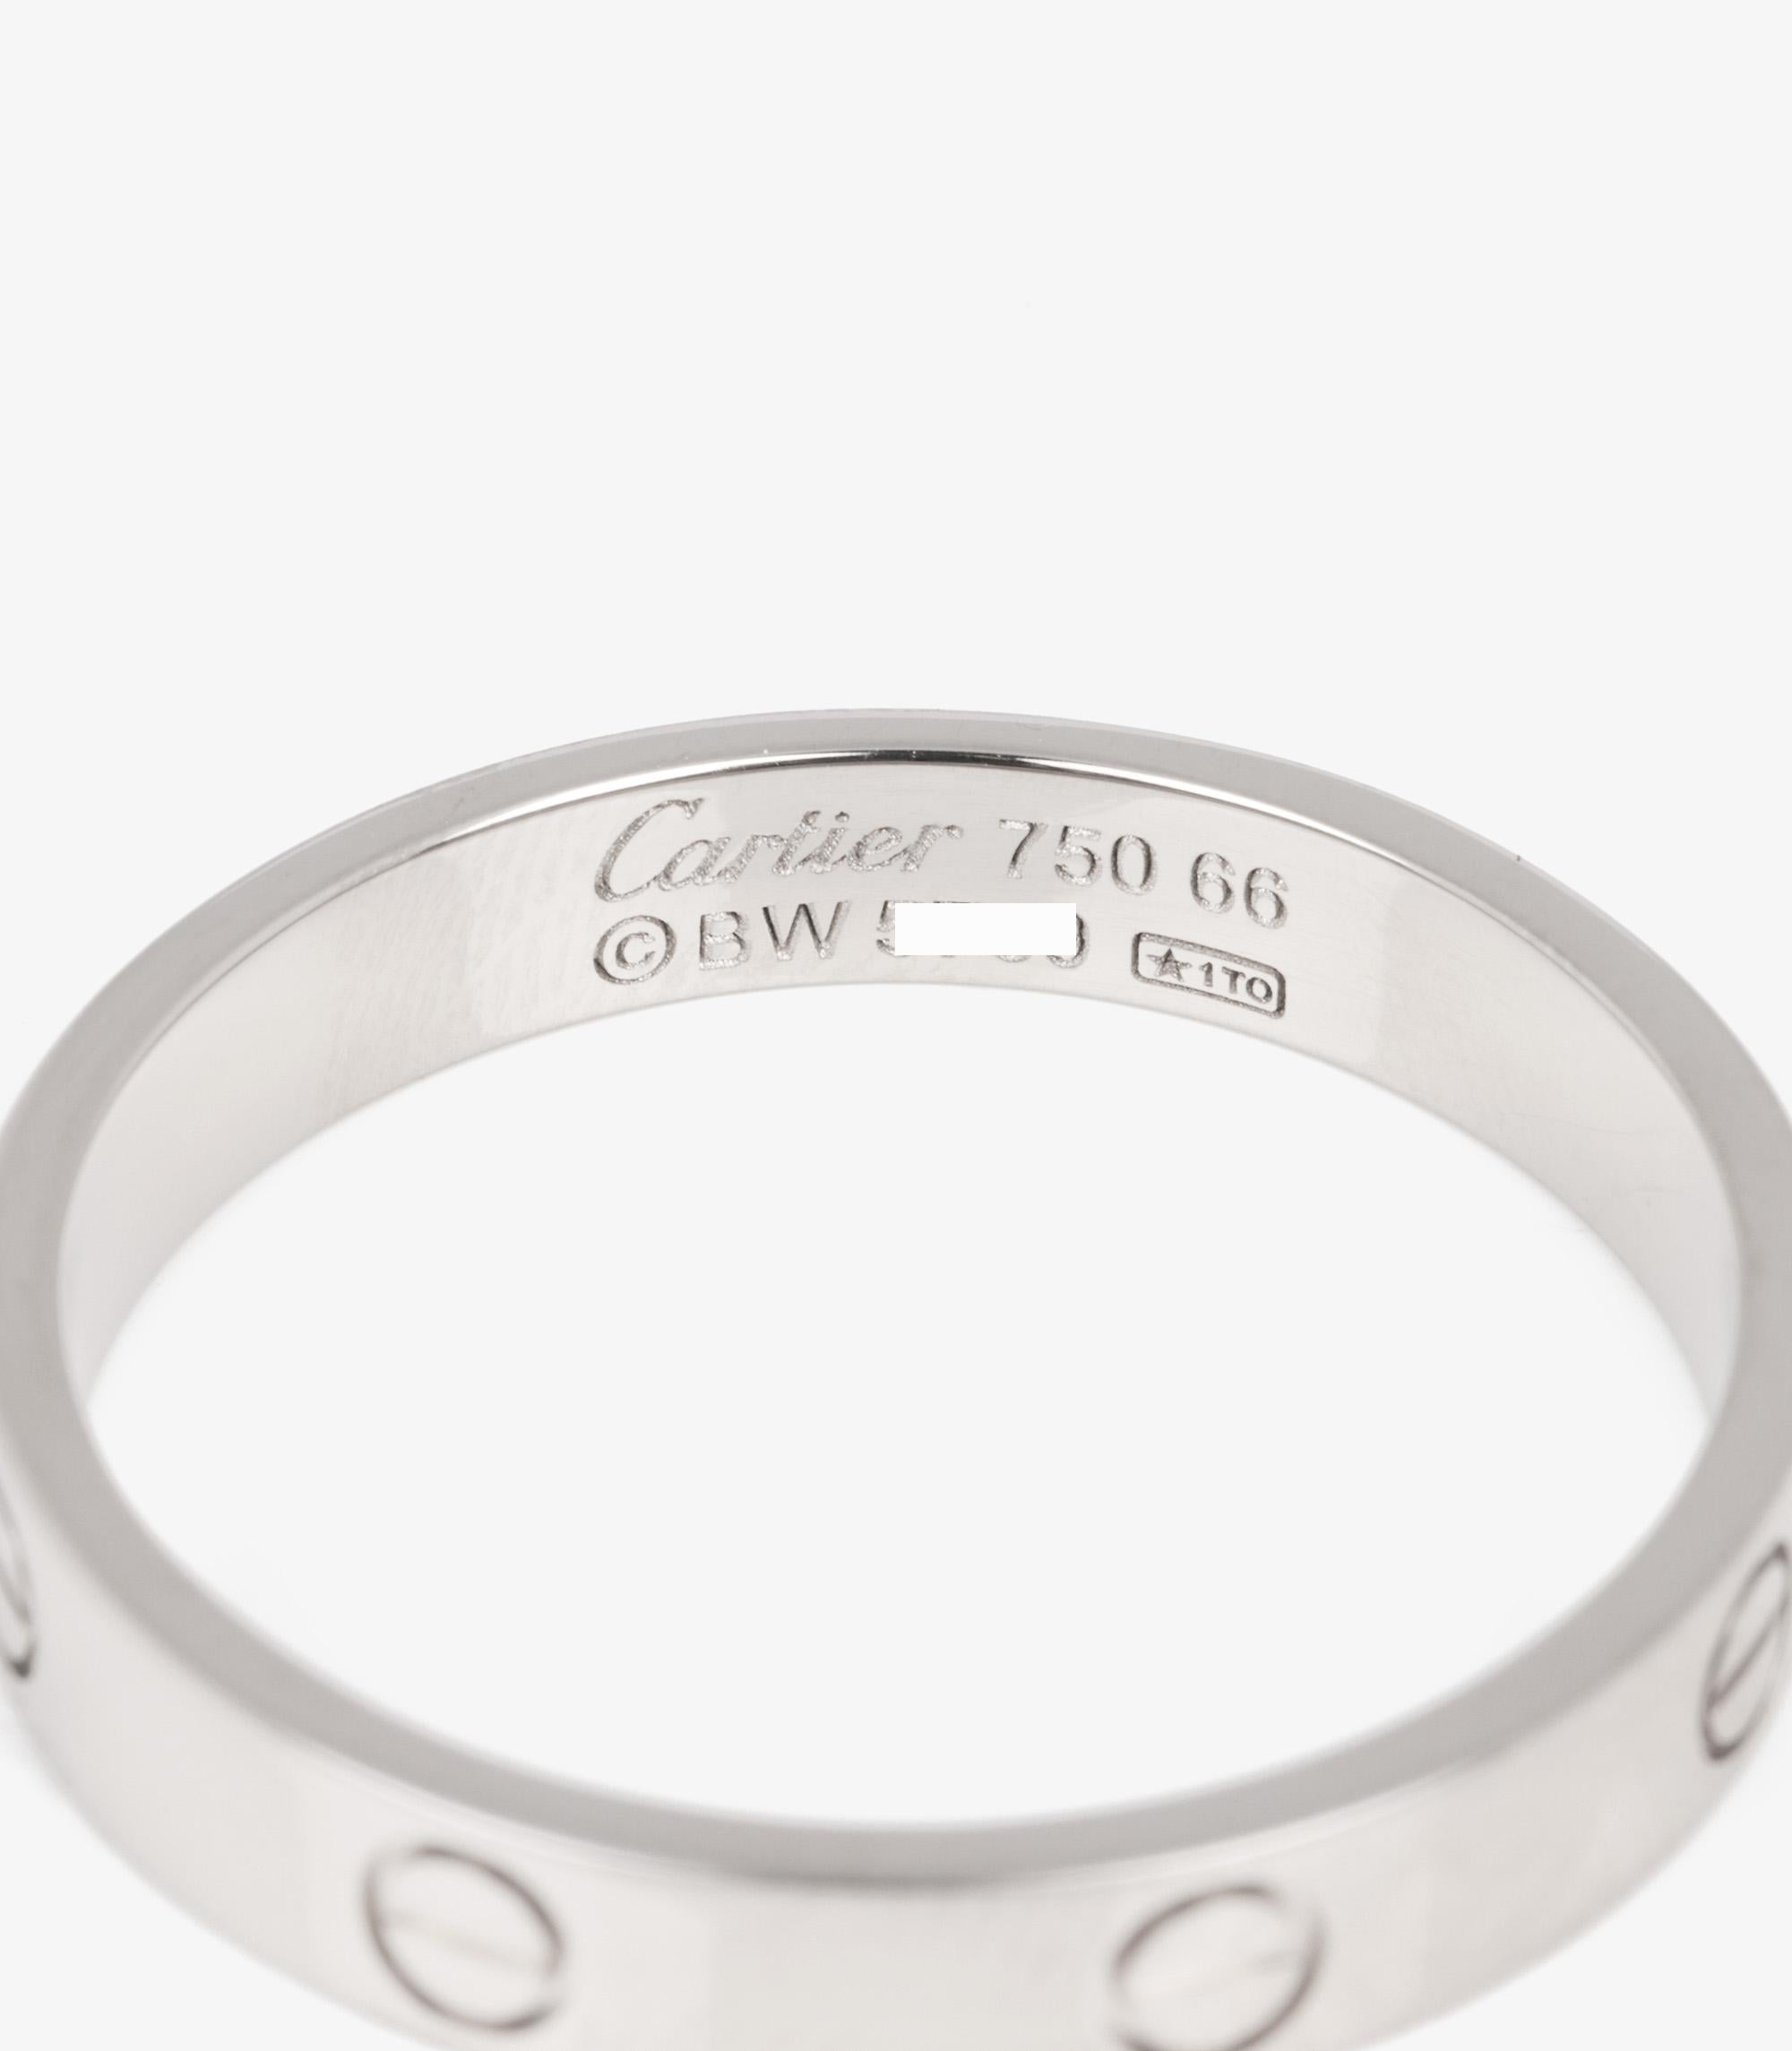 Cartier 18ct White Gold Love Wedding Band Ring In Excellent Condition For Sale In Bishop's Stortford, Hertfordshire